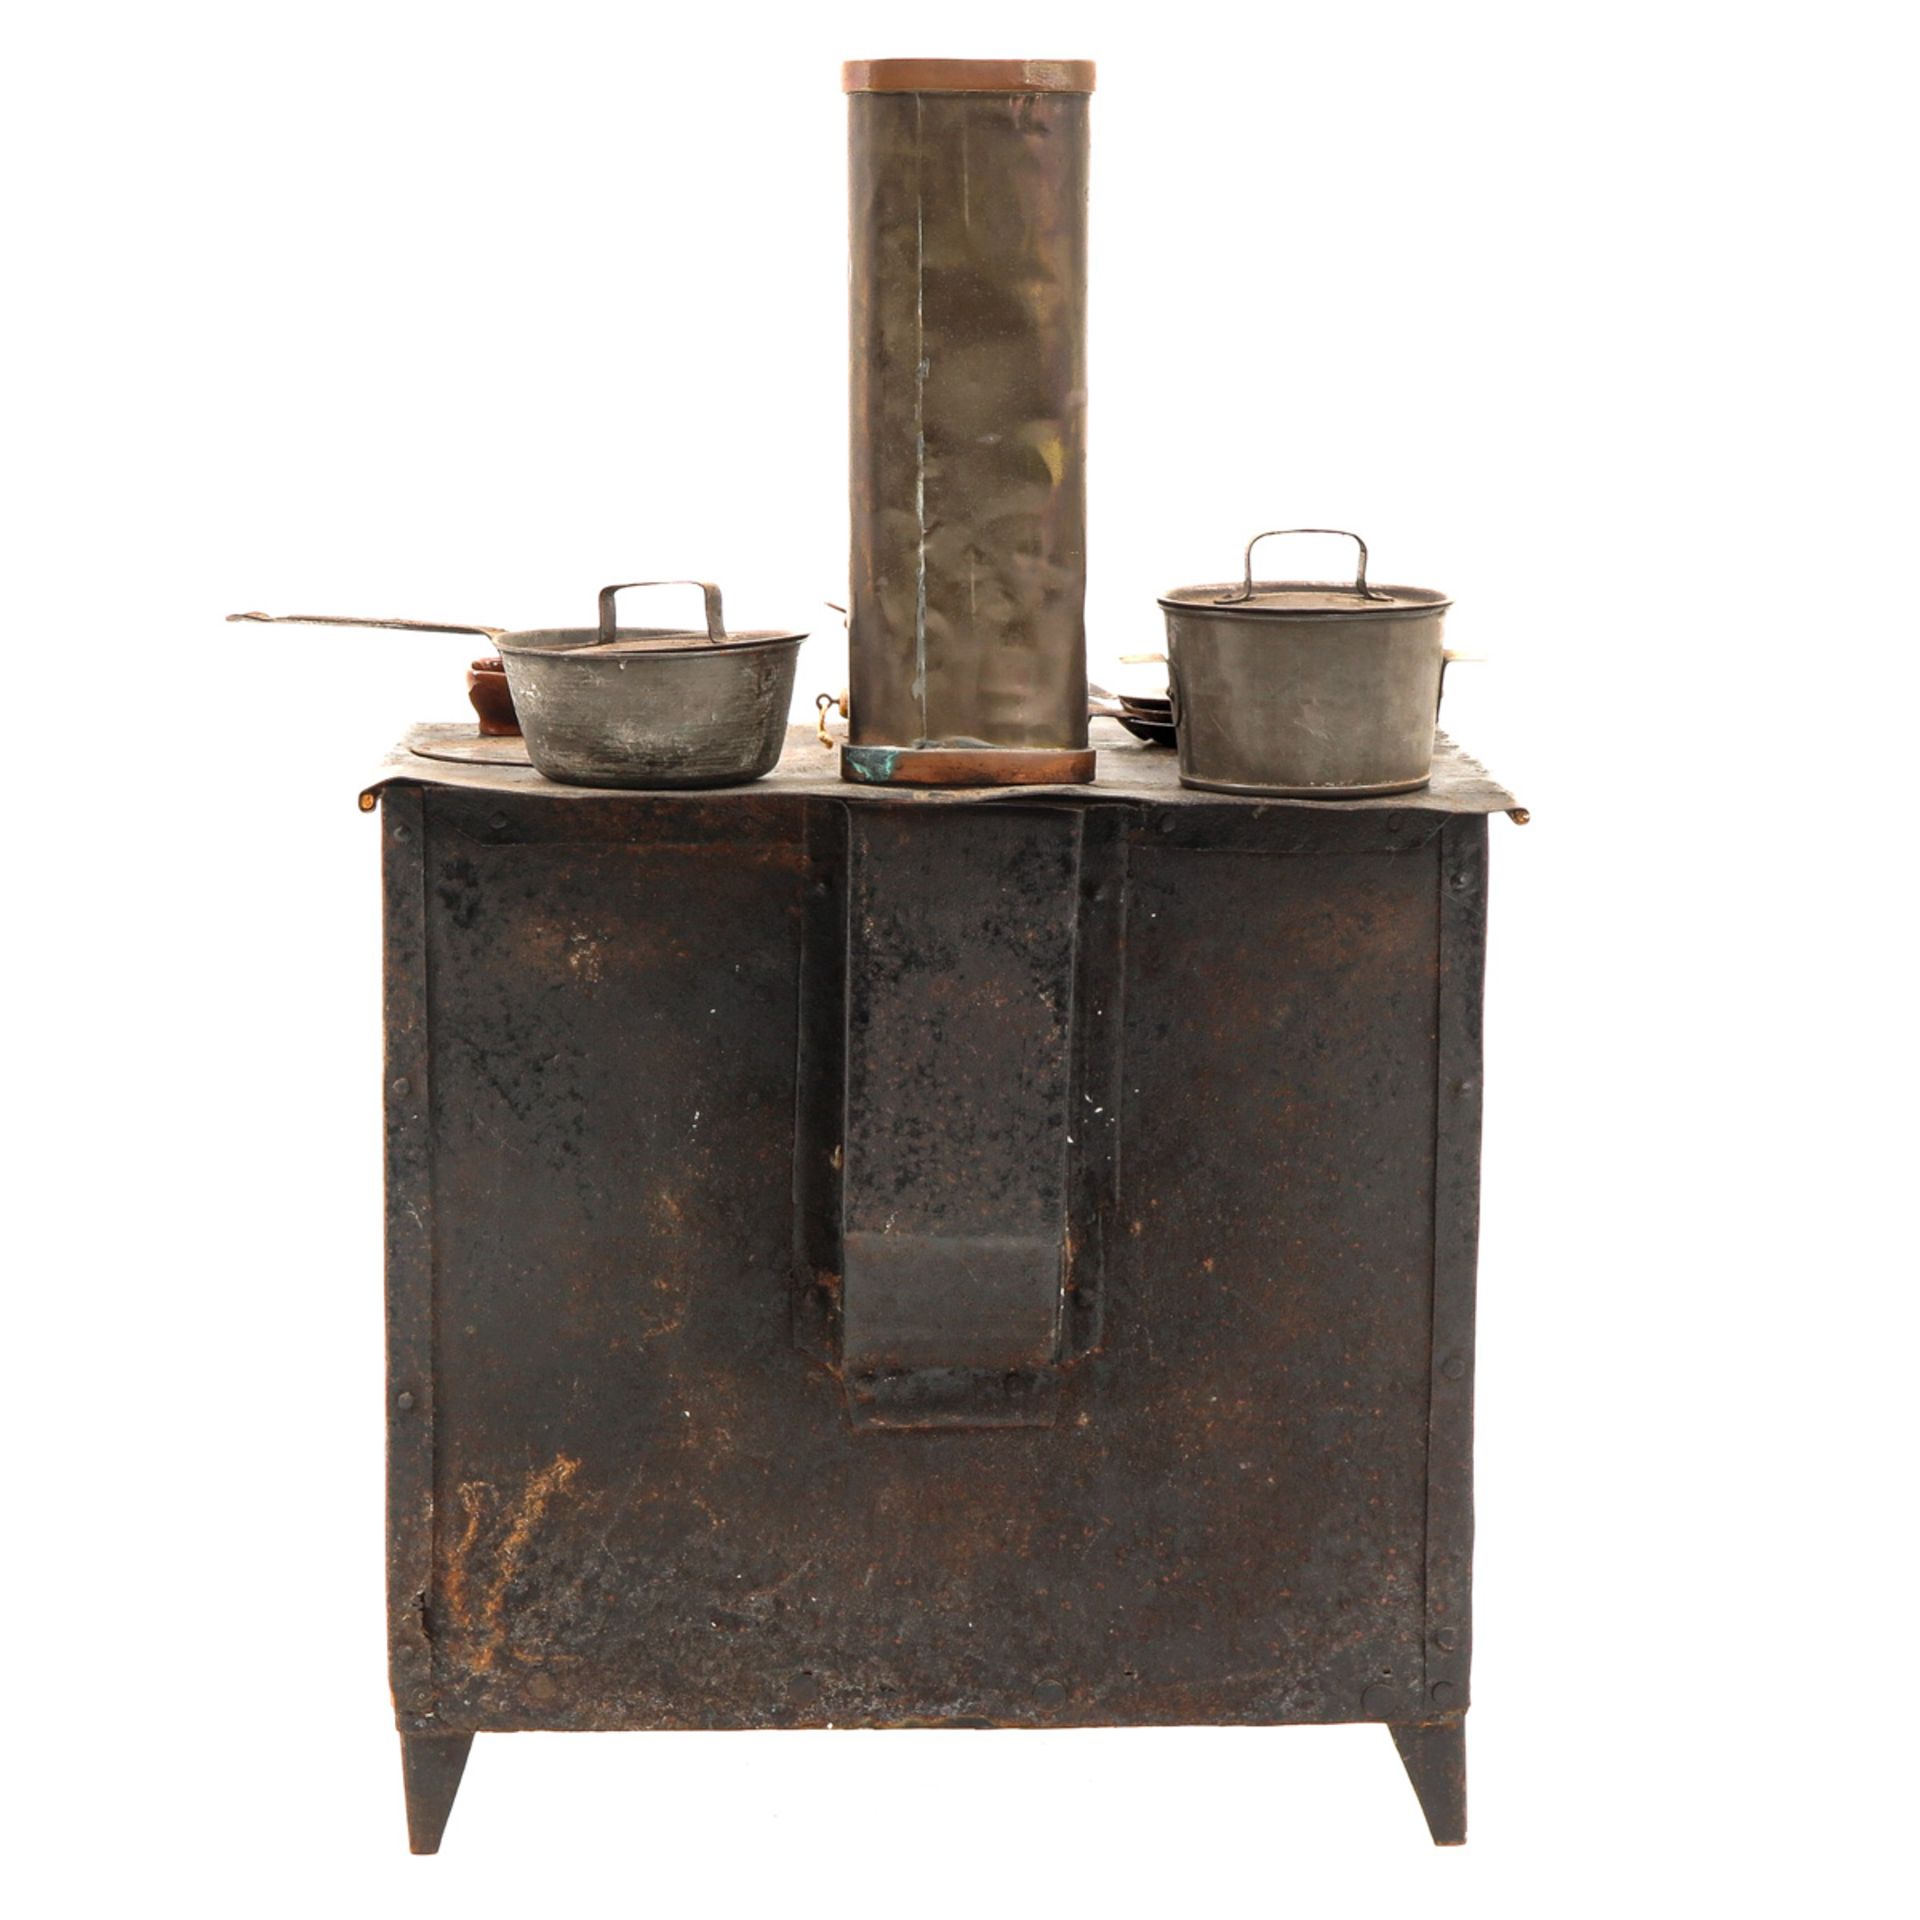 A Children's Stove - Image 3 of 9